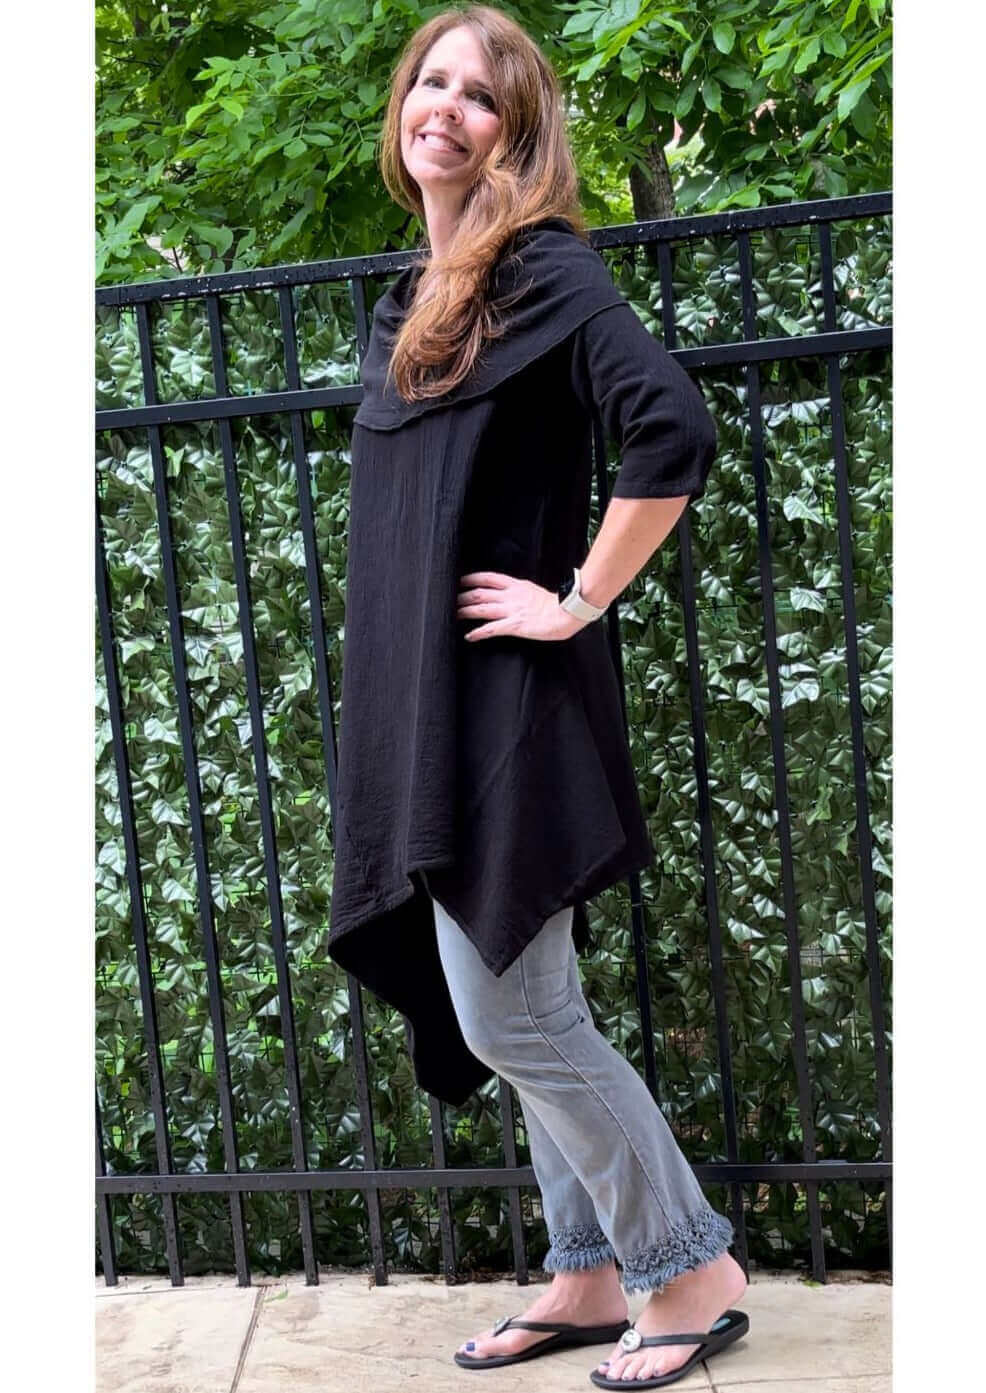 Made in USA Women's 100% Cotton Lightweight Asymmetrical Cowl Neck Long Line Tunic in Black | Classy Cozy Cool Women's Made in America Boutique